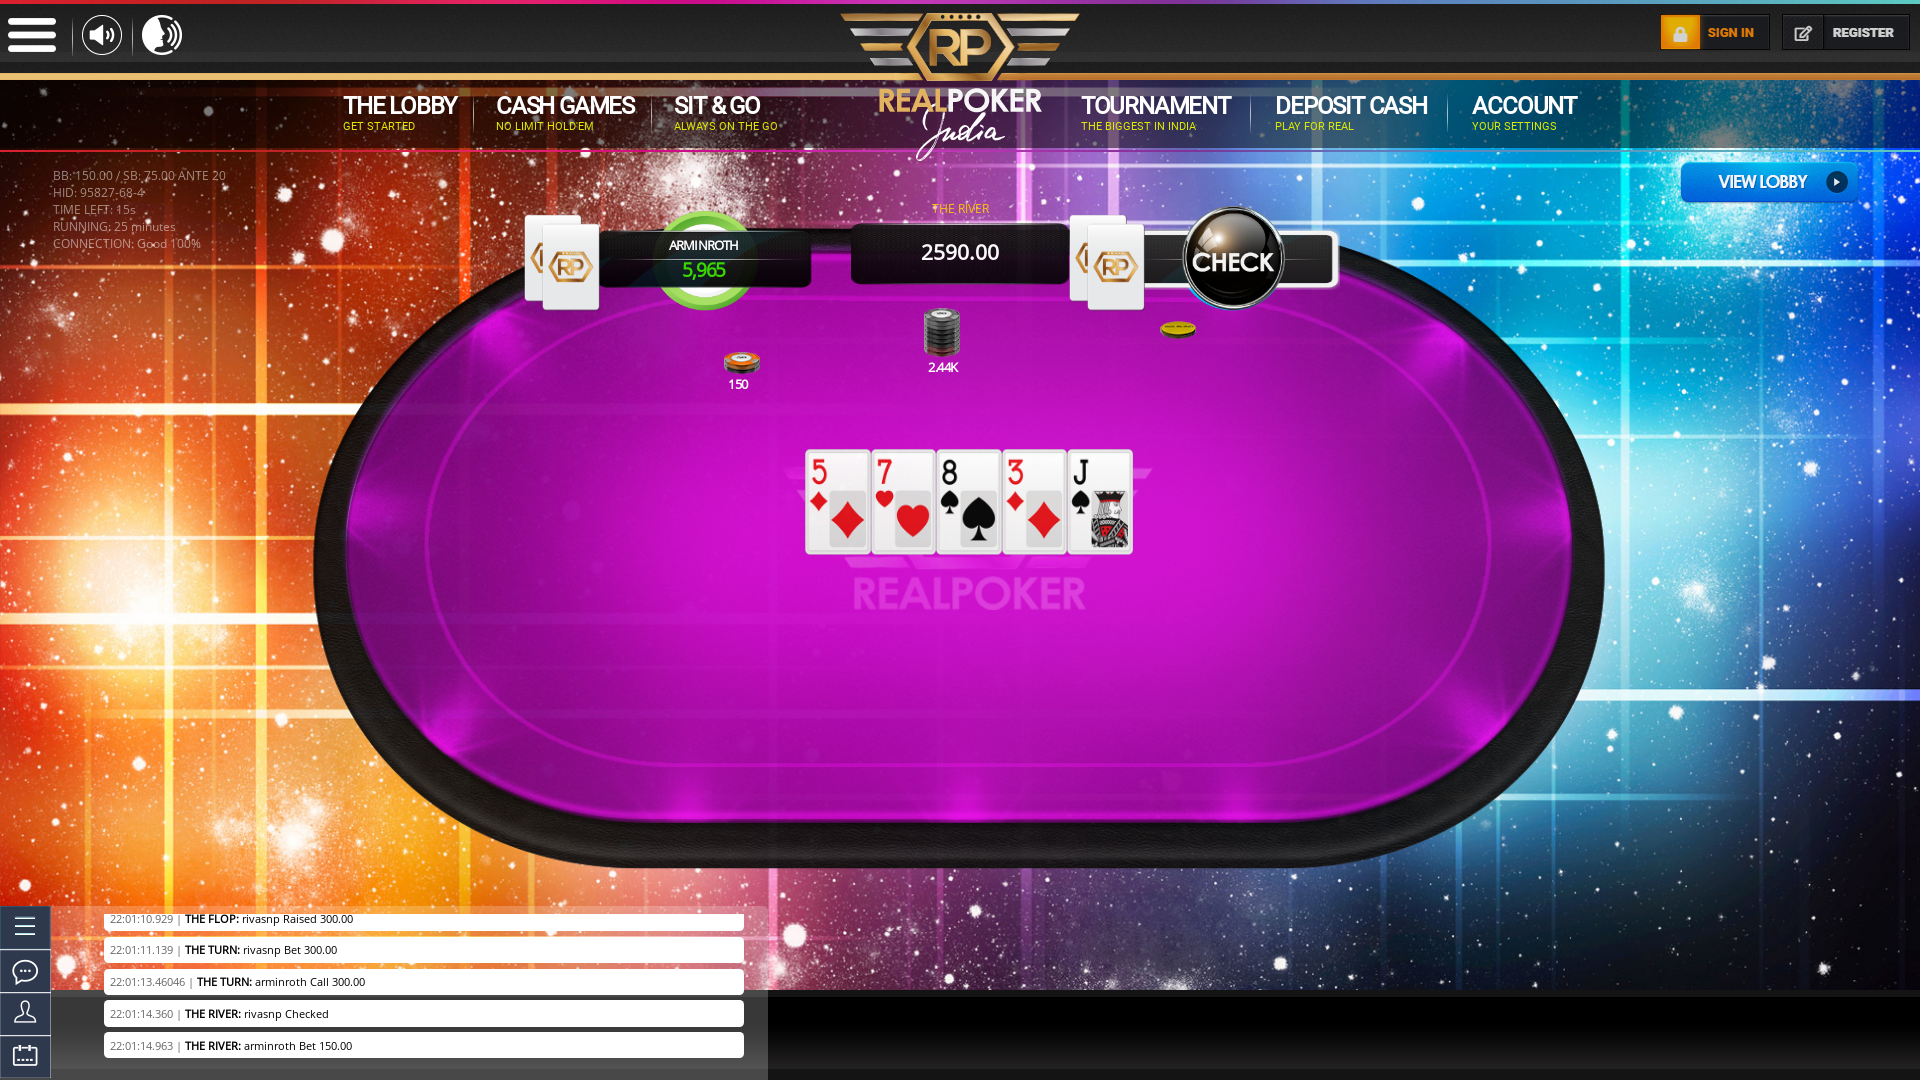 Real poker 6 player table in the 25th minute of the match